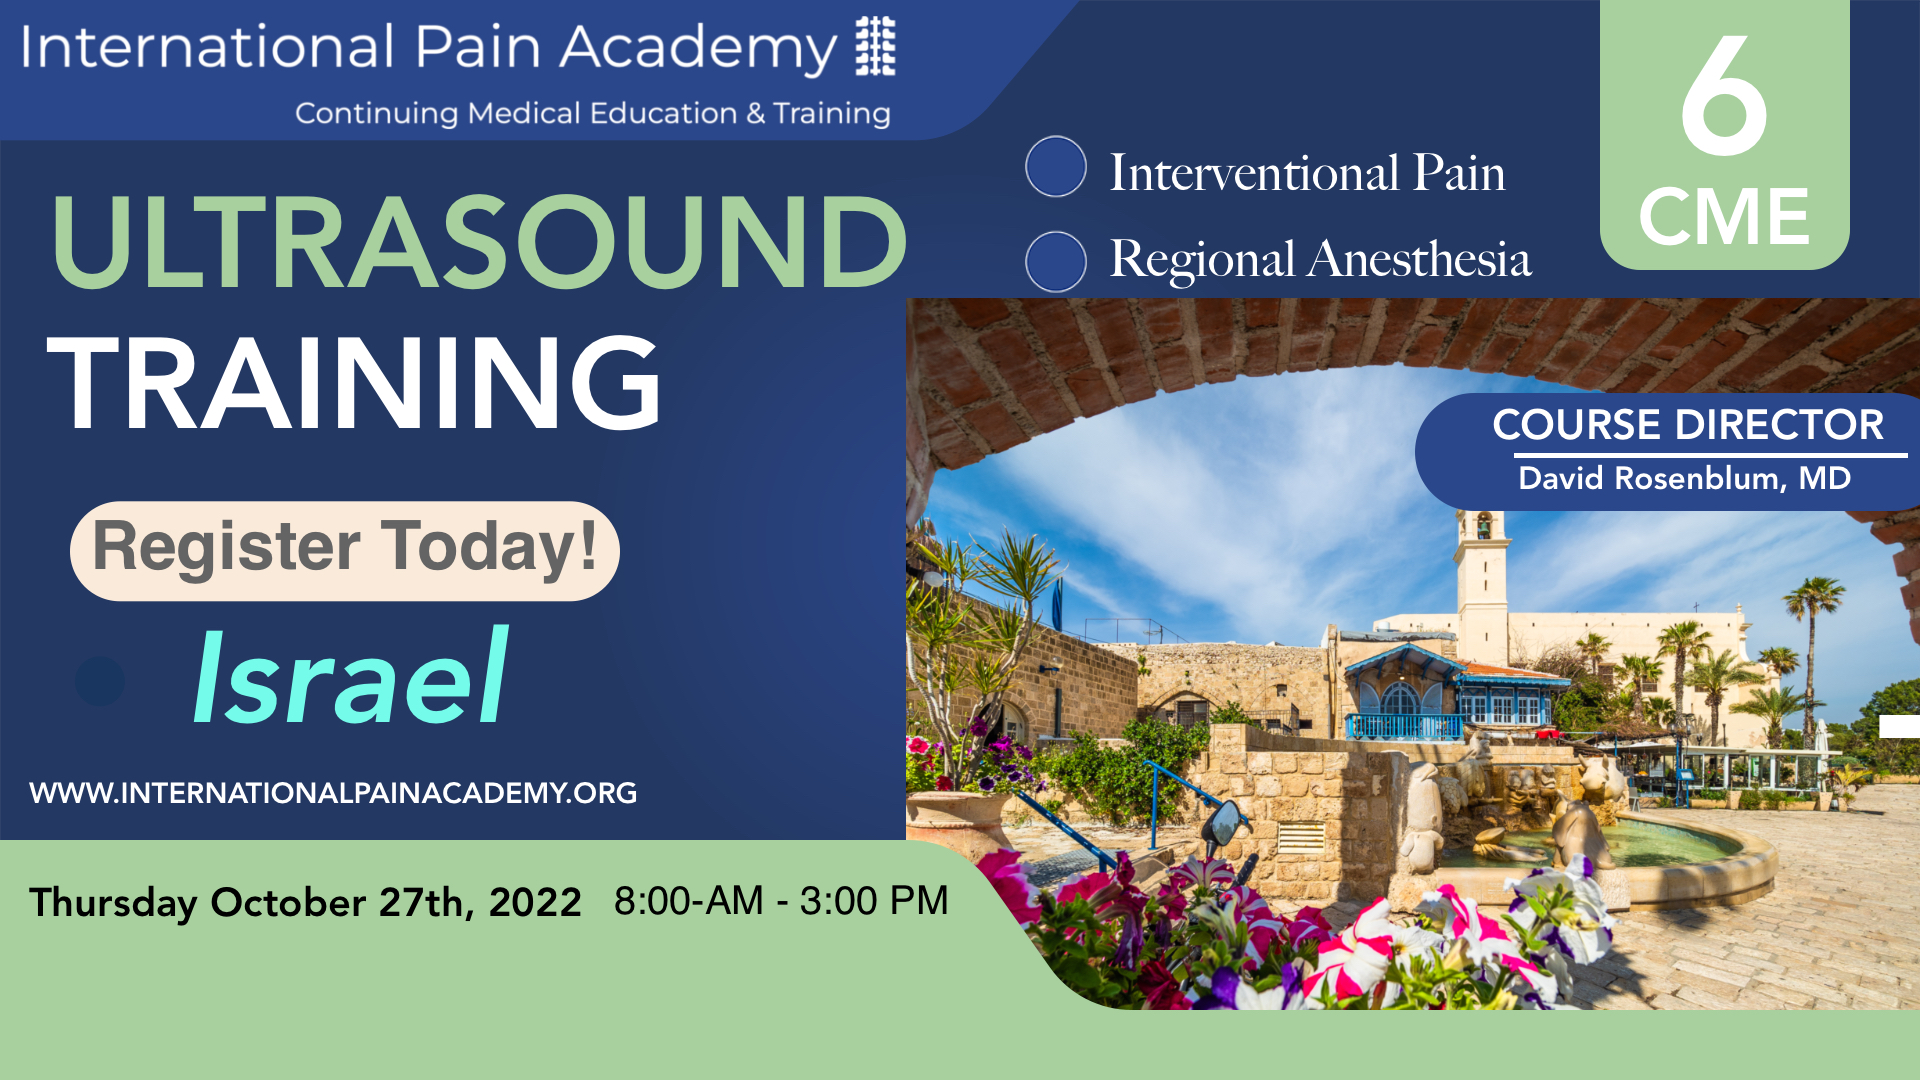 Ultrasound guided regional aneshtis and pain medicine training in Israel 